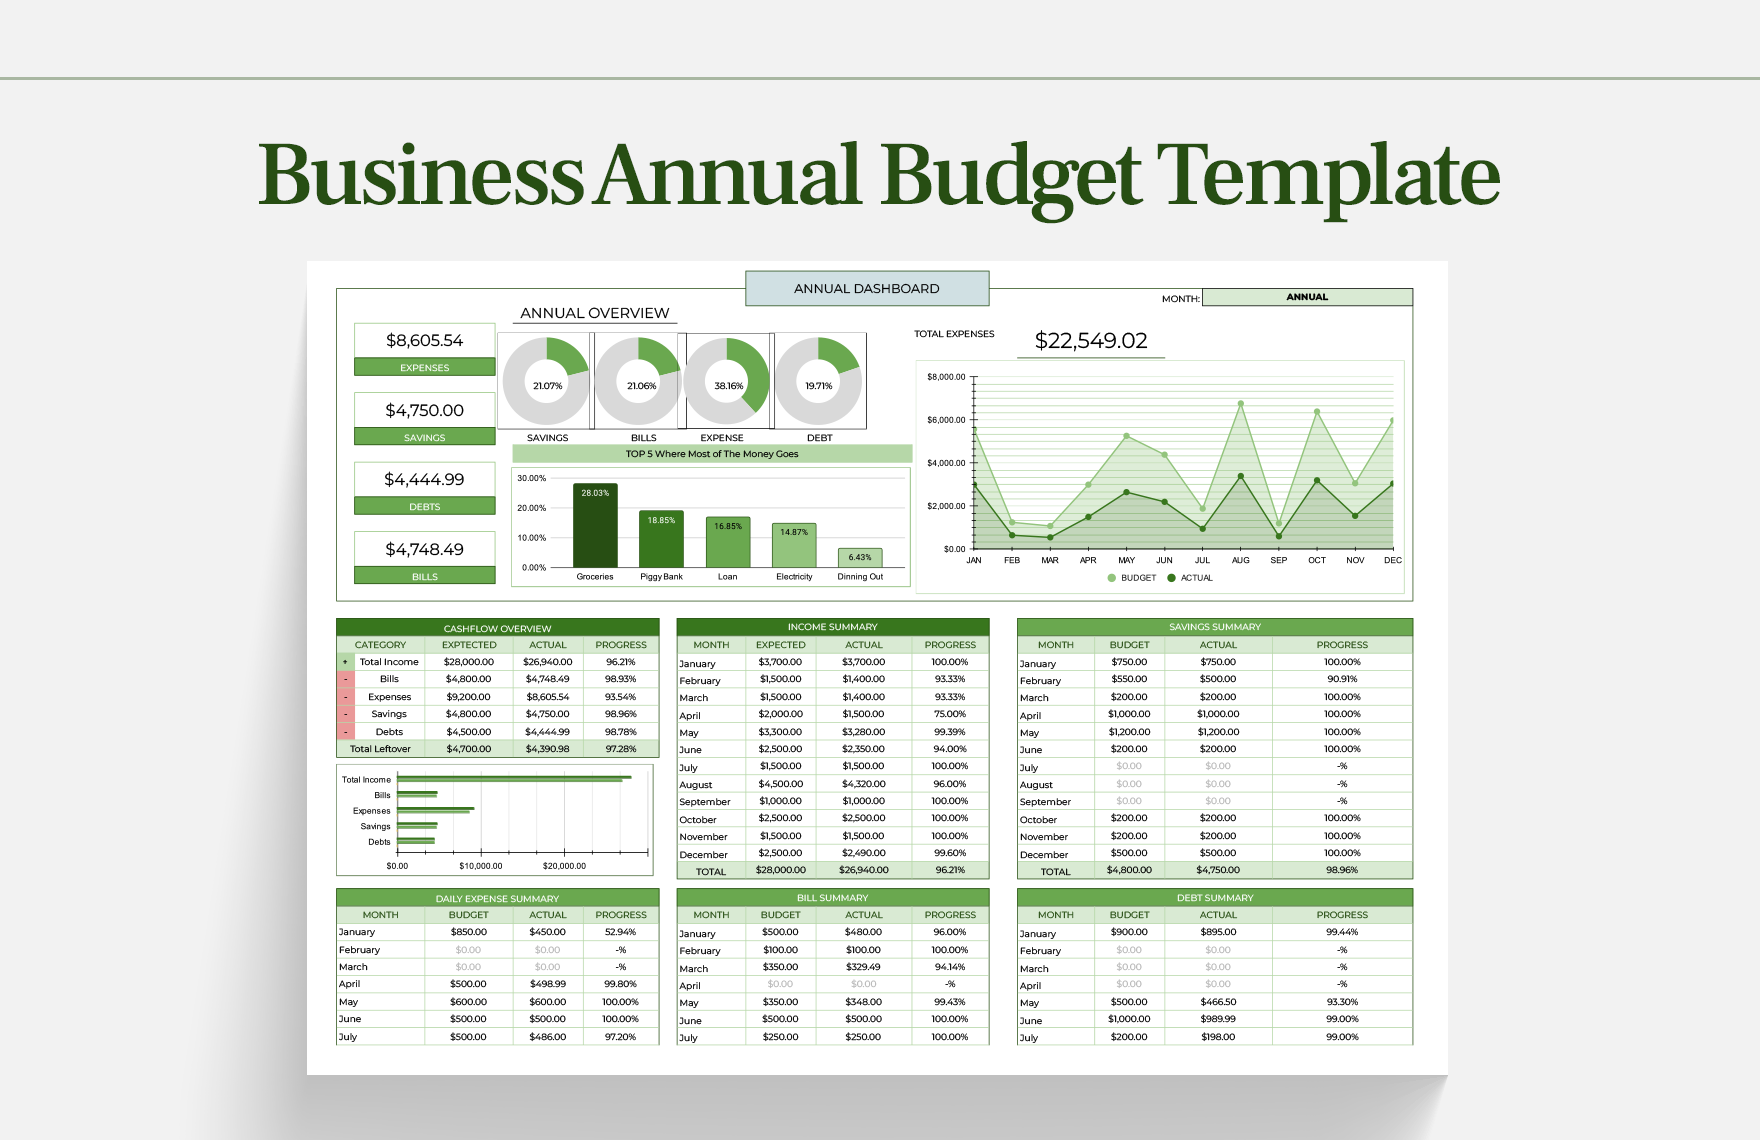 Business Annual Budget Template